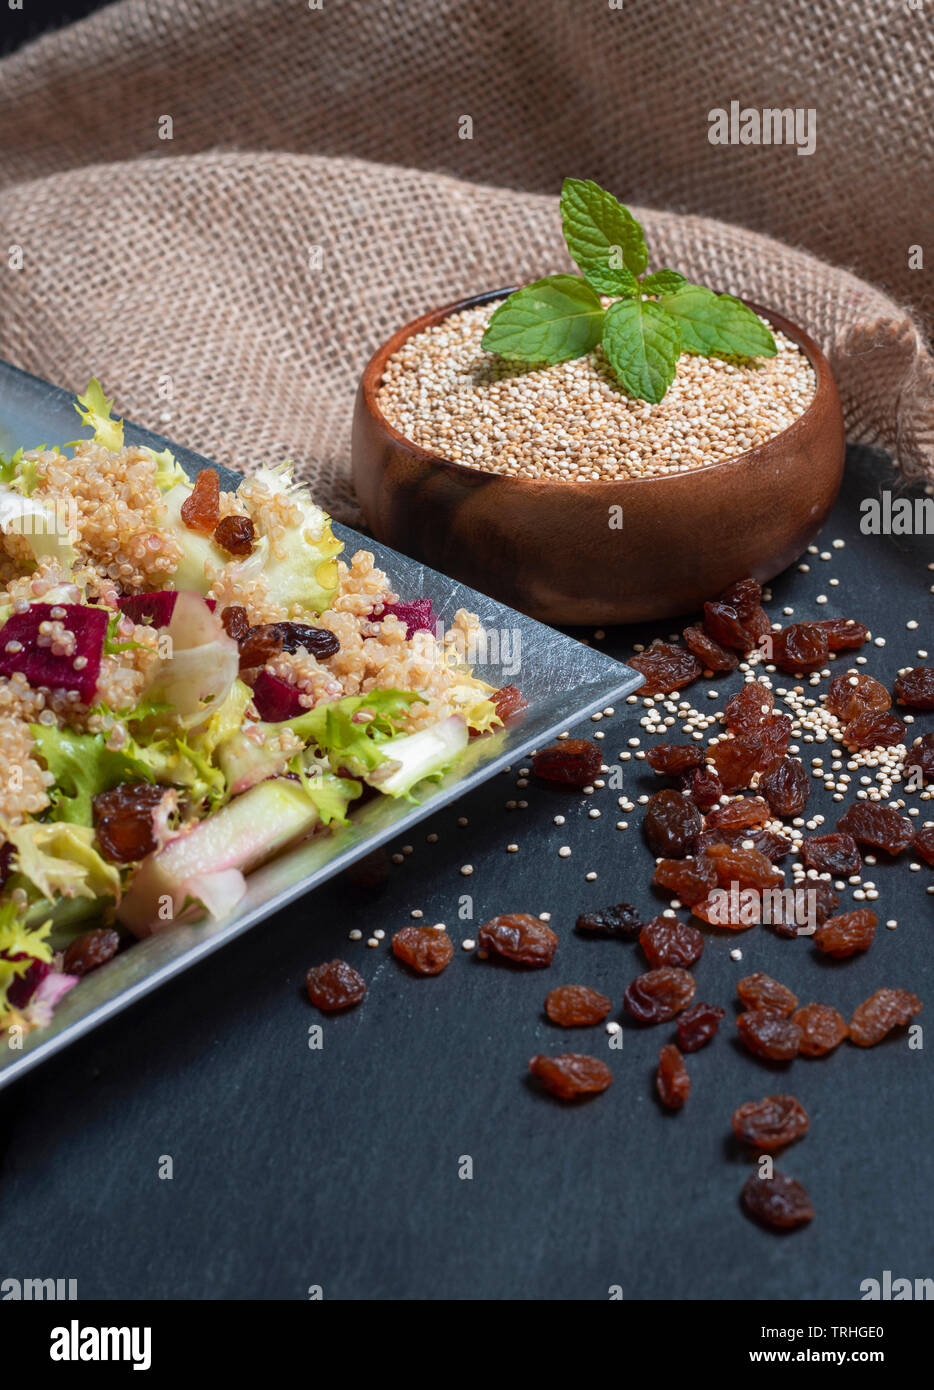 Raw and cooked quinoa served in salad Stock Photo